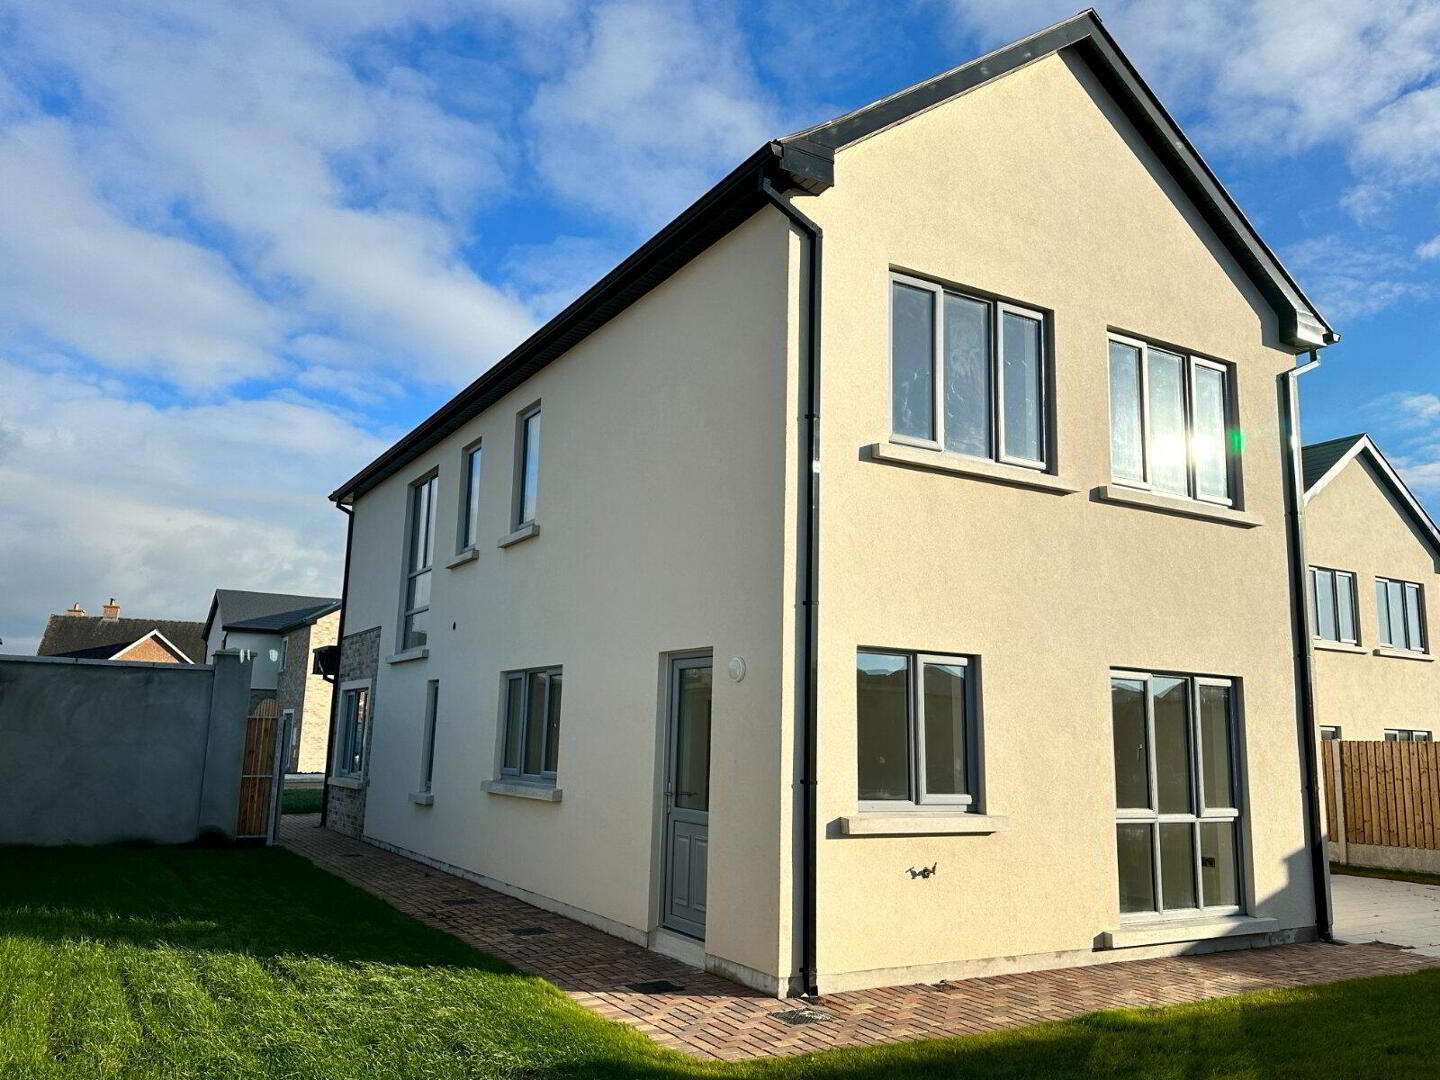 The Primrose 5 Bed Detched Type B, Fox Meadow